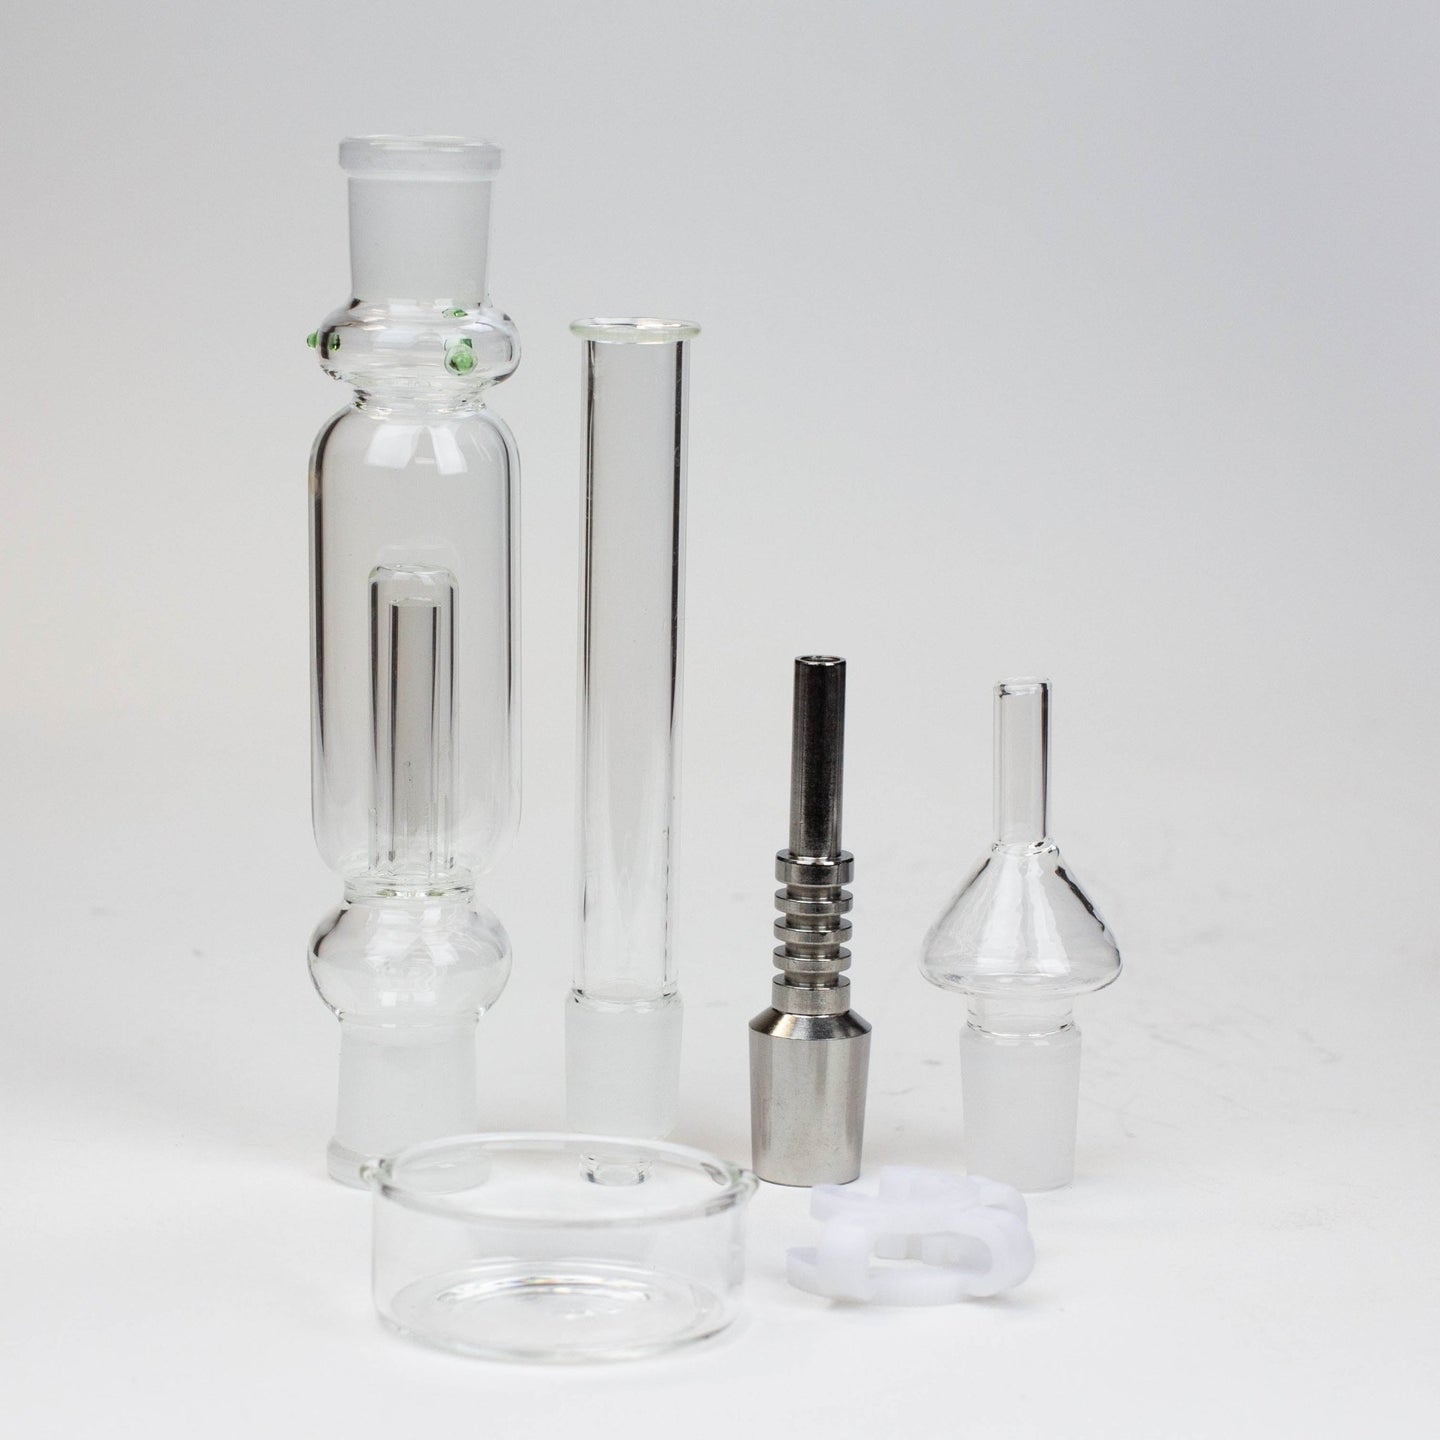 Glass and Titanium Nectar Collector Kit - Glasss Station